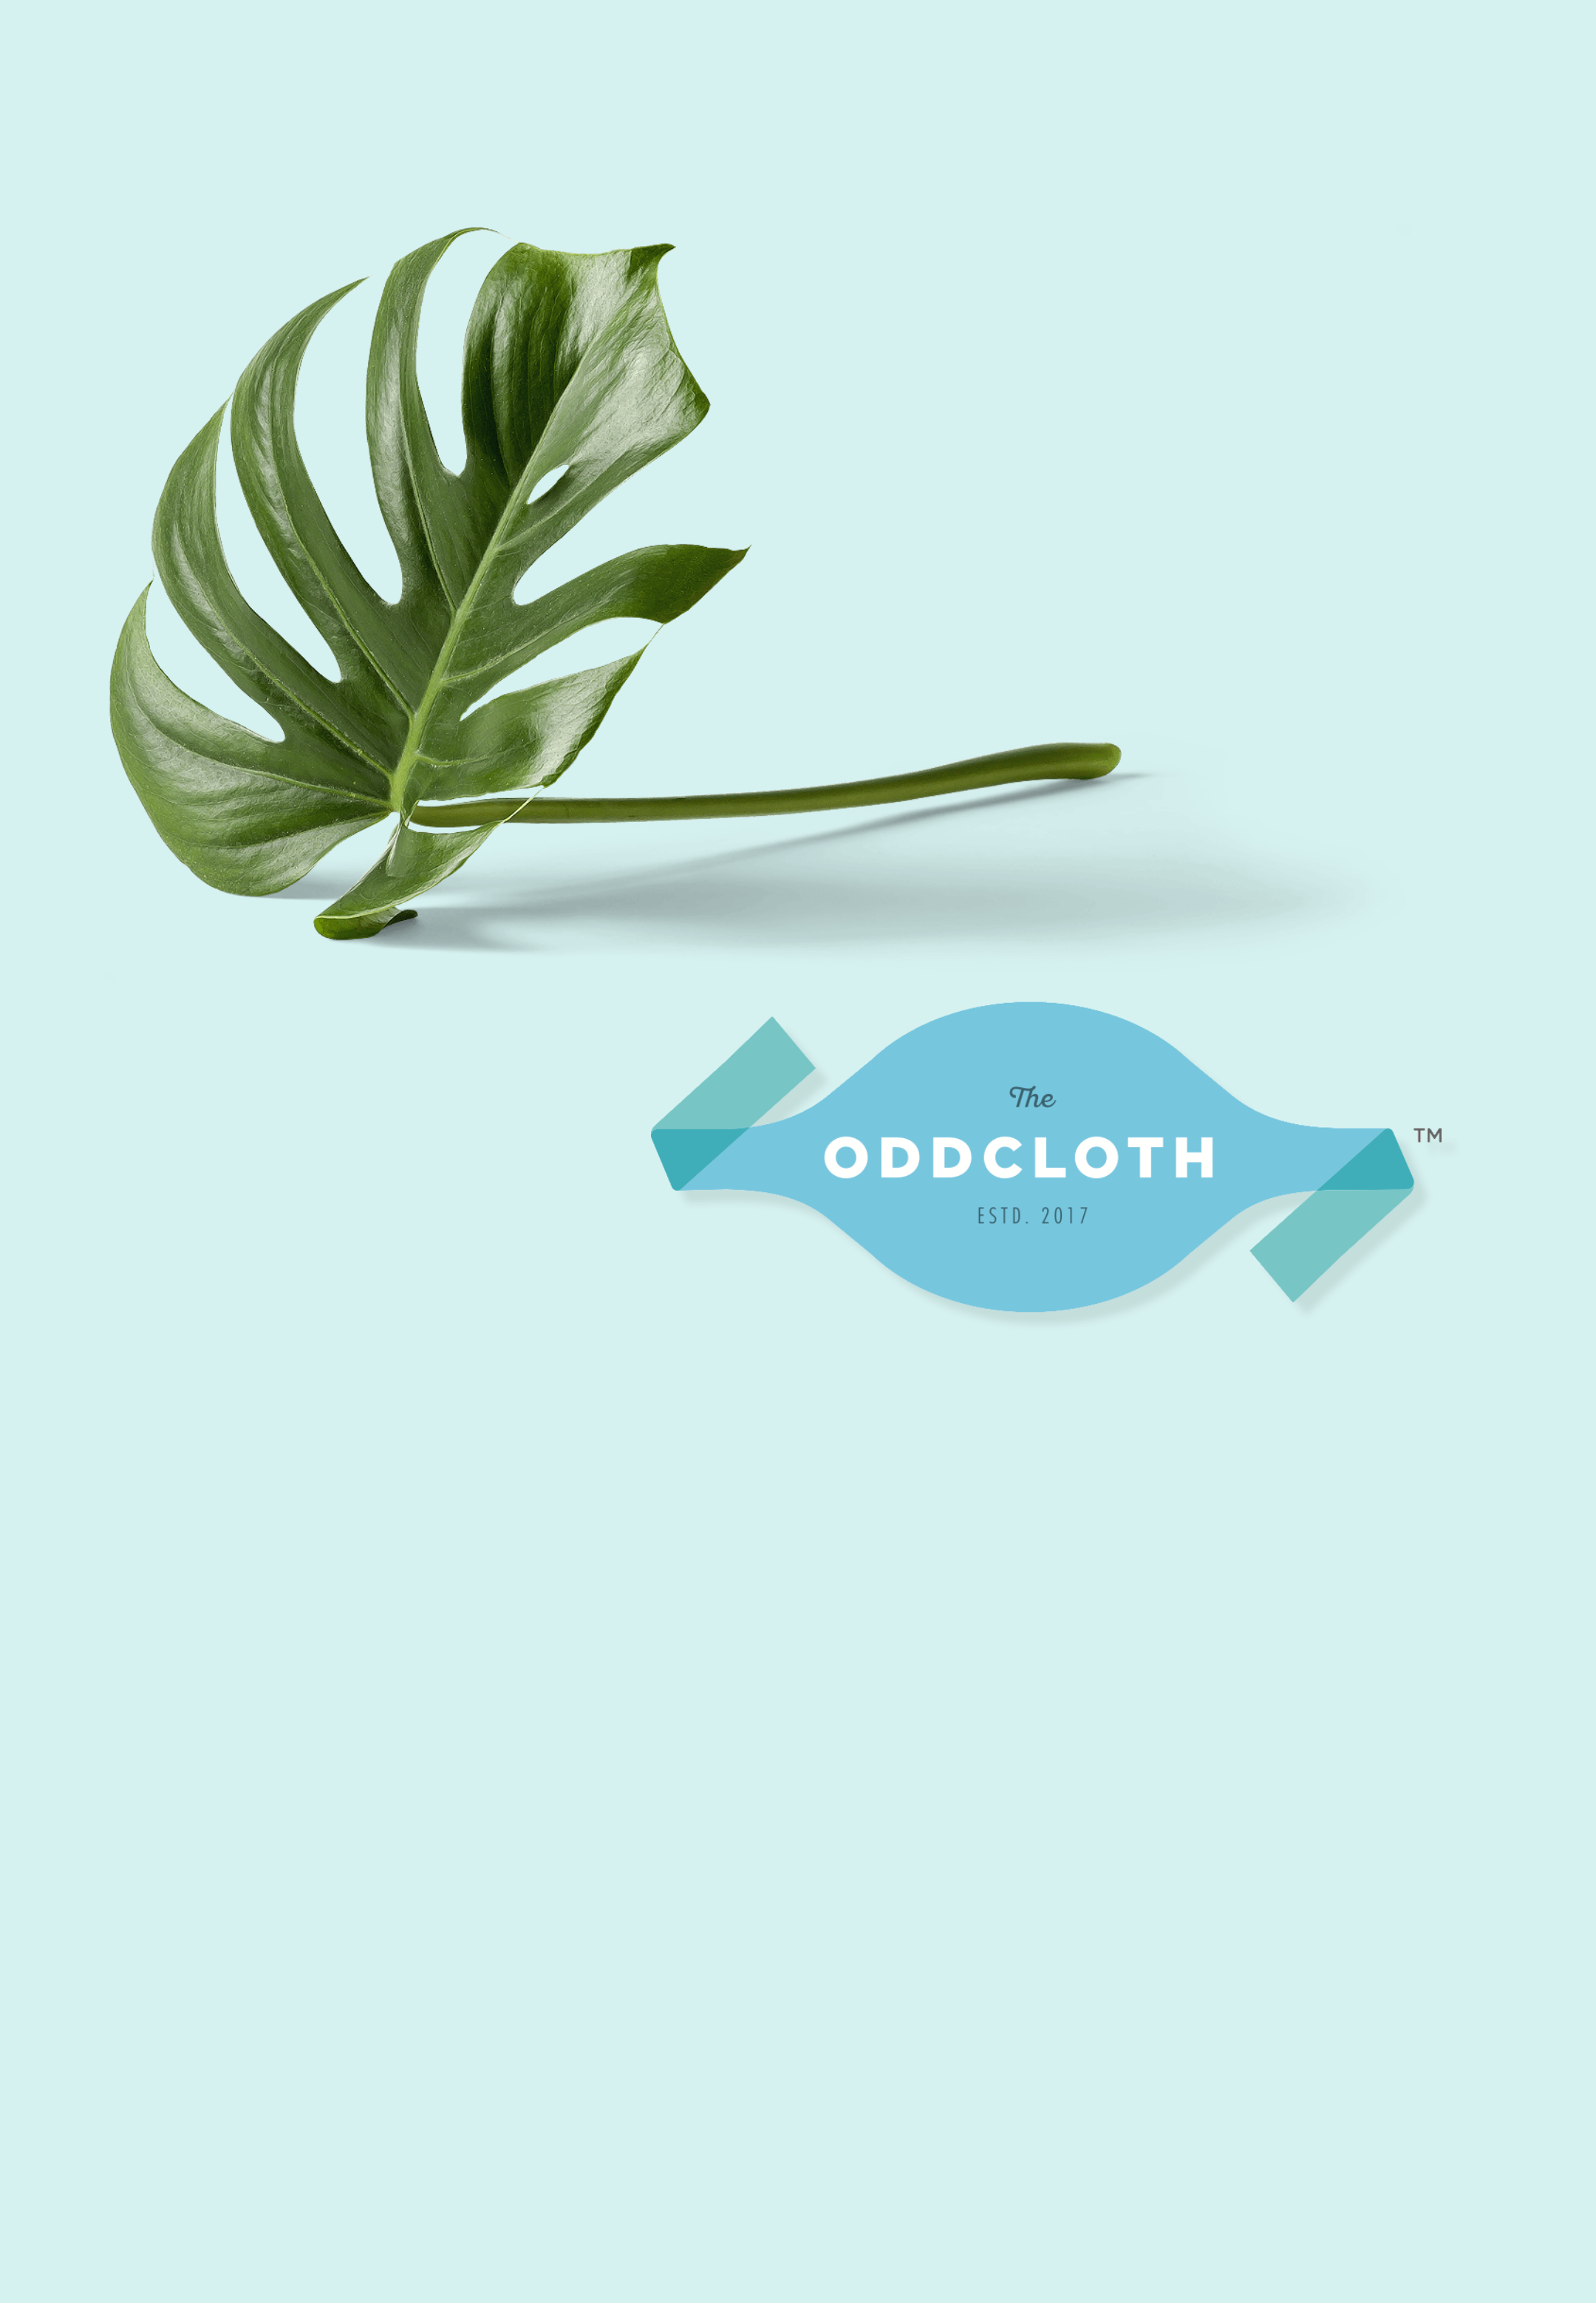 The Oddcloth Benefits